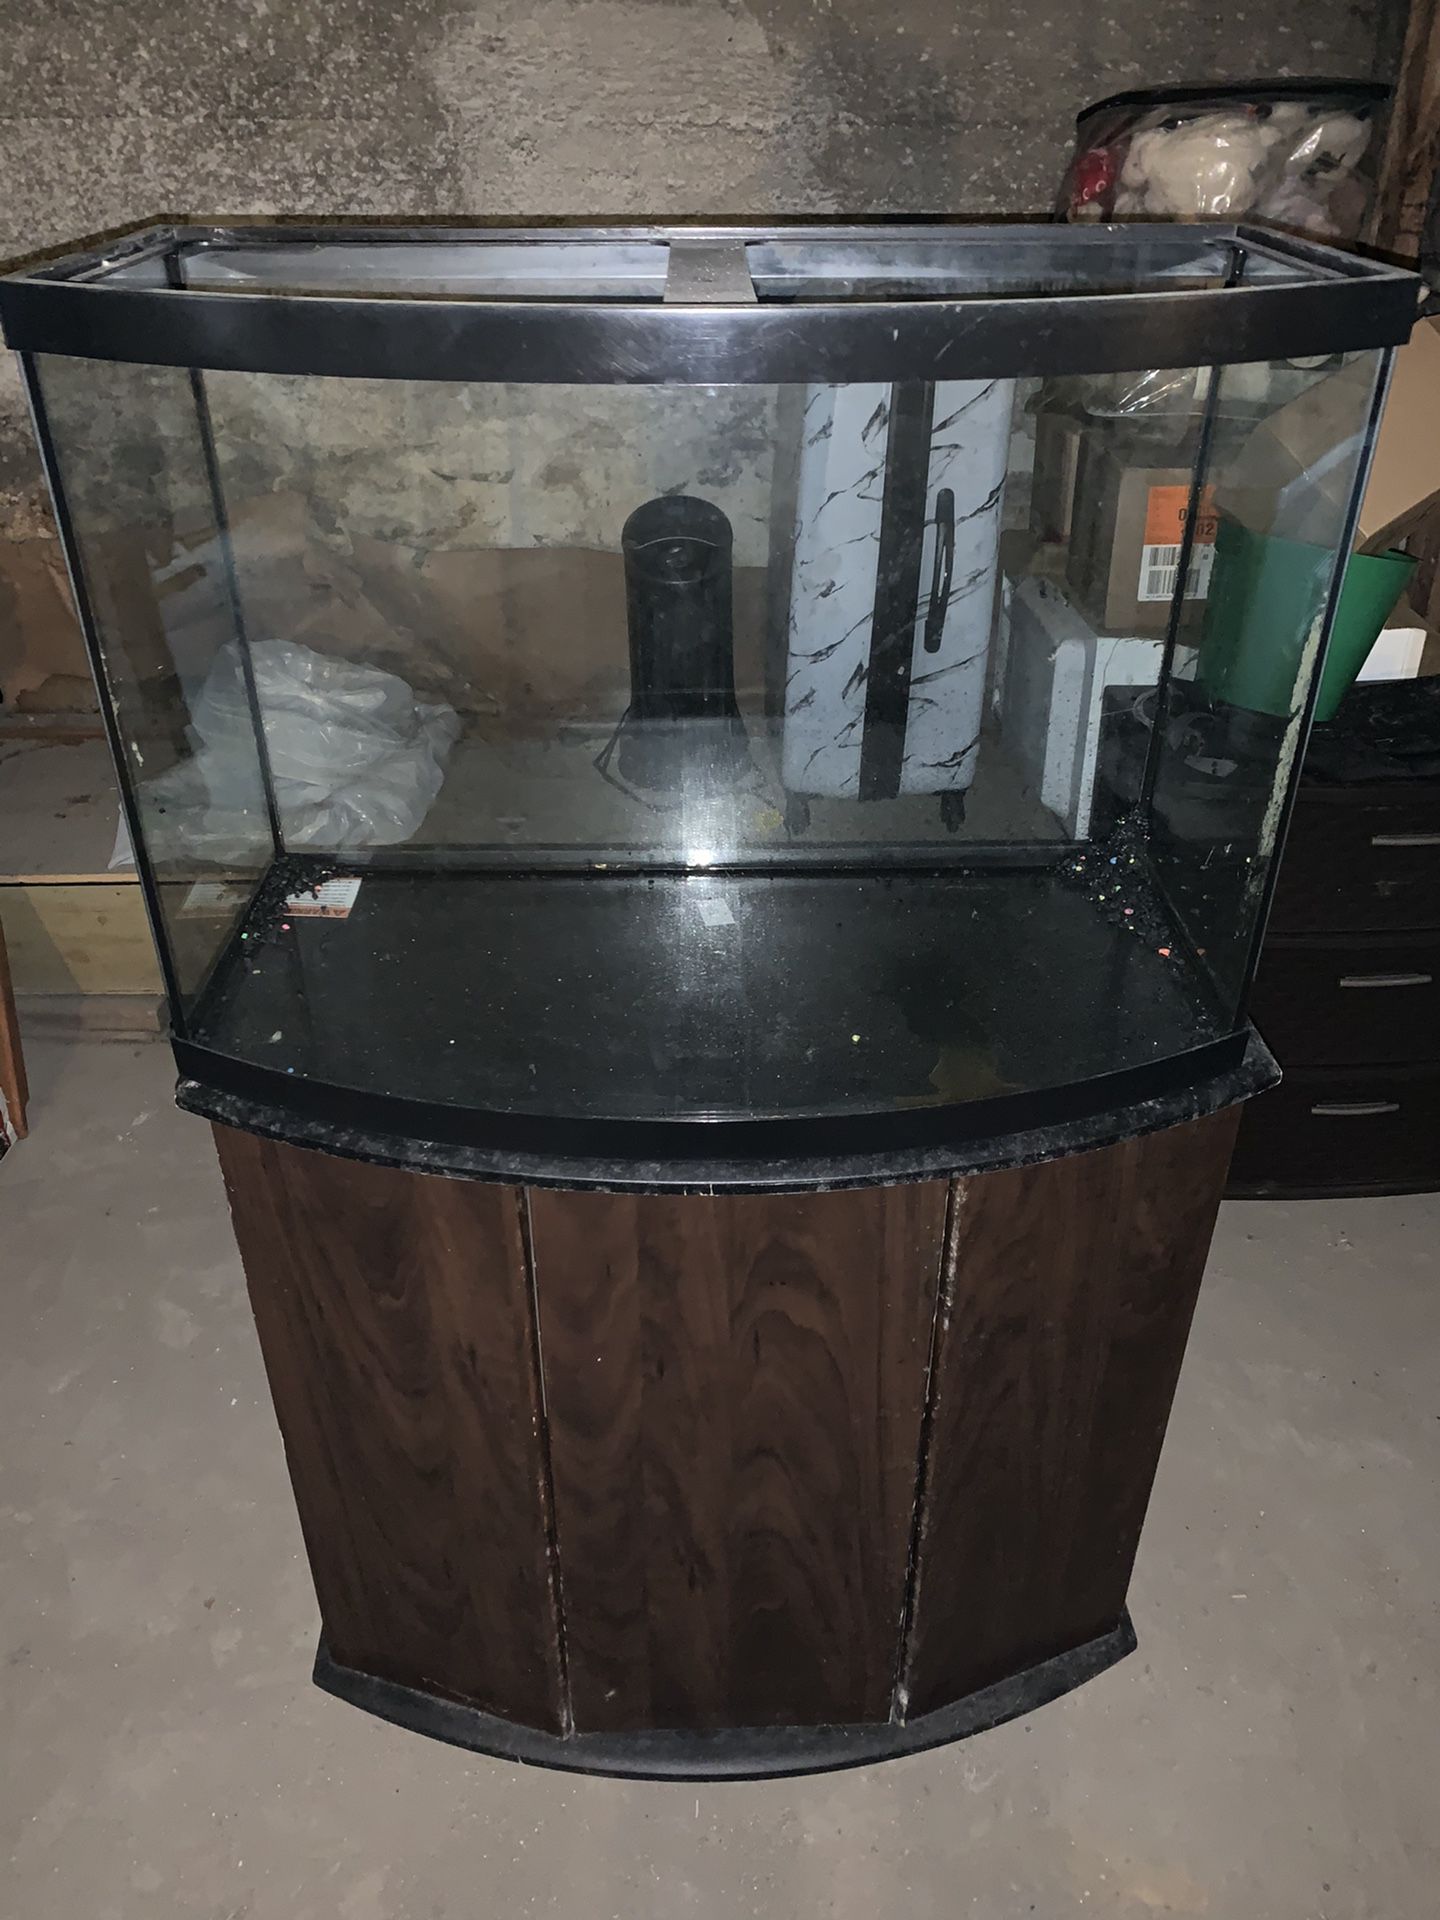 Aqeuon 36 gallon bow front fish tank with stand and accessories